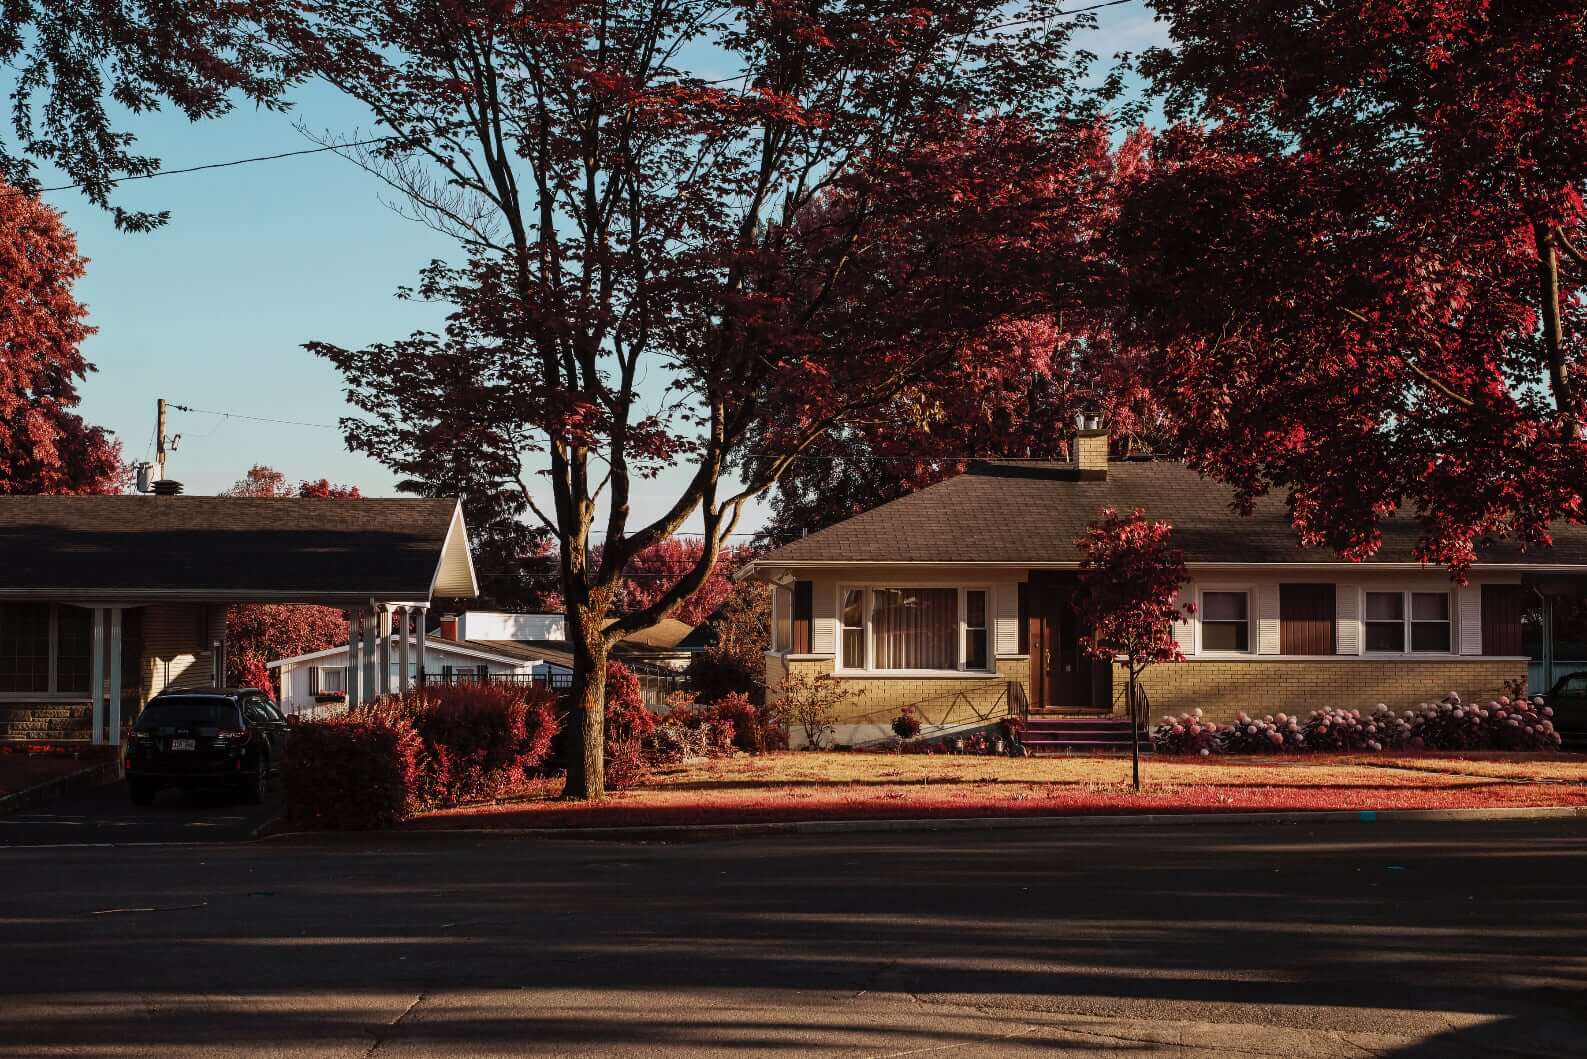 Photo of single-story house on suburban street, trees and hedges with red leaves, and long afternoon shadows